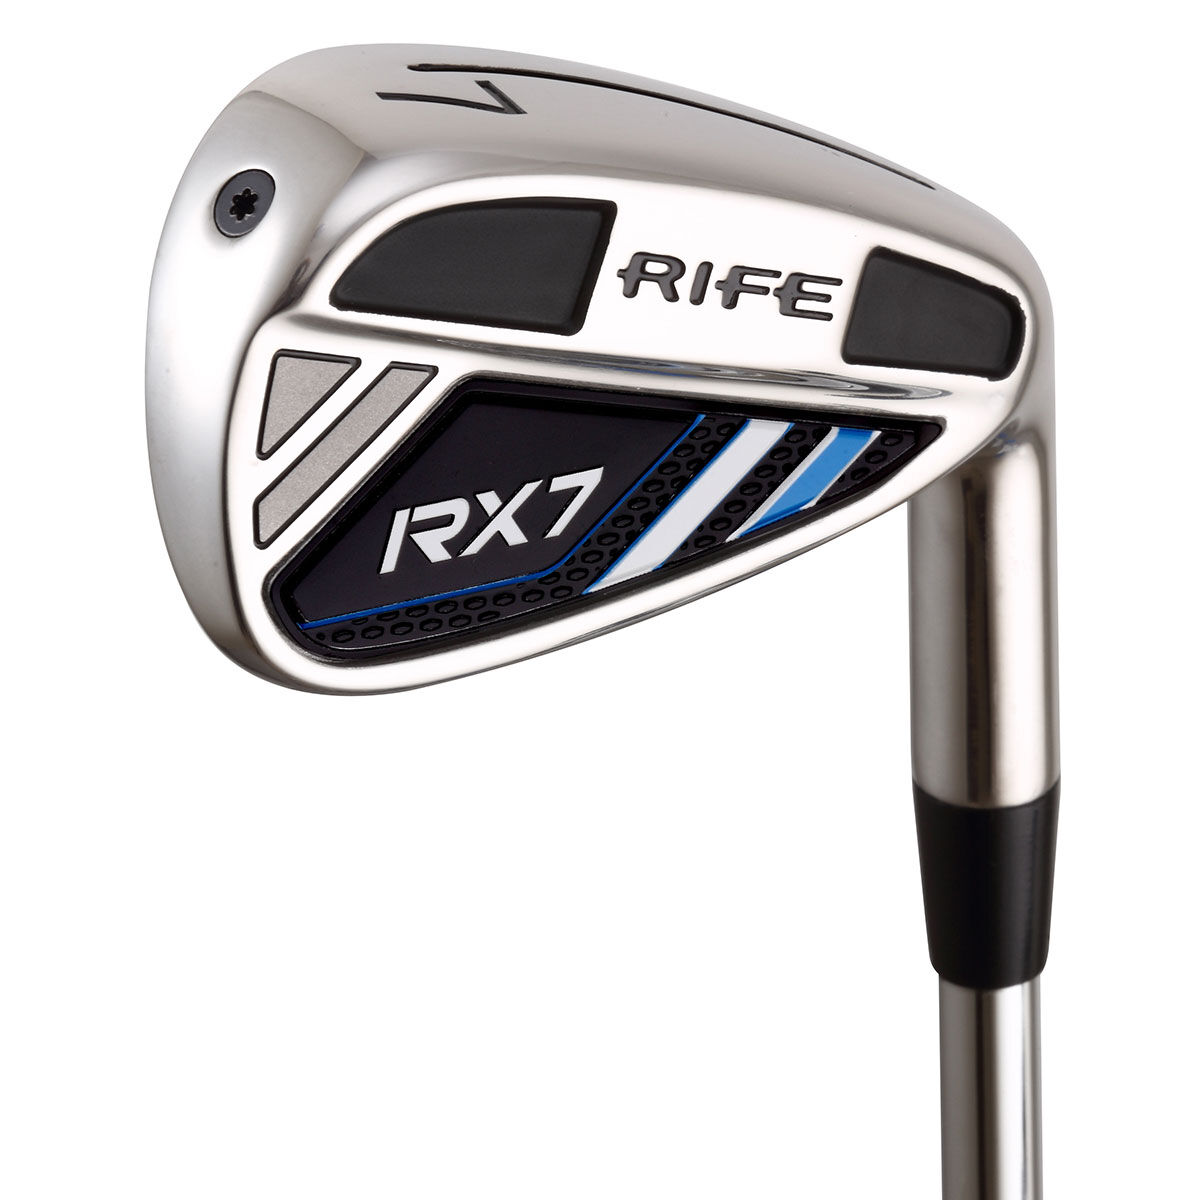 Rife Black and Silver RX7 Steel Regular Right Hand 5-sw 7 Golf Irons | American Golf, One Size von Rife